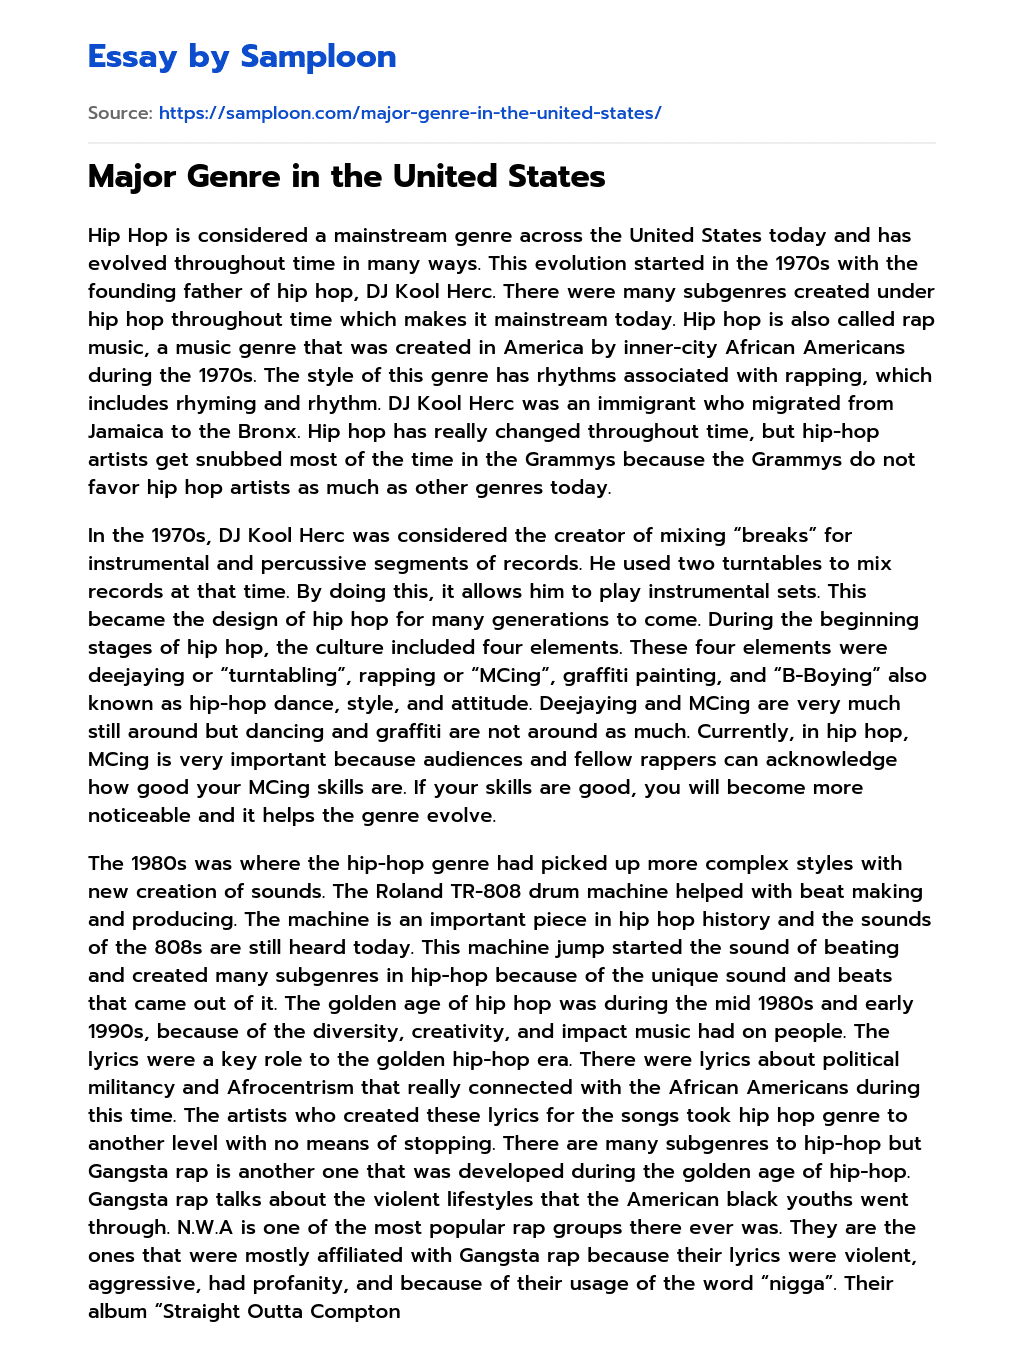 Major Genre in the United States essay